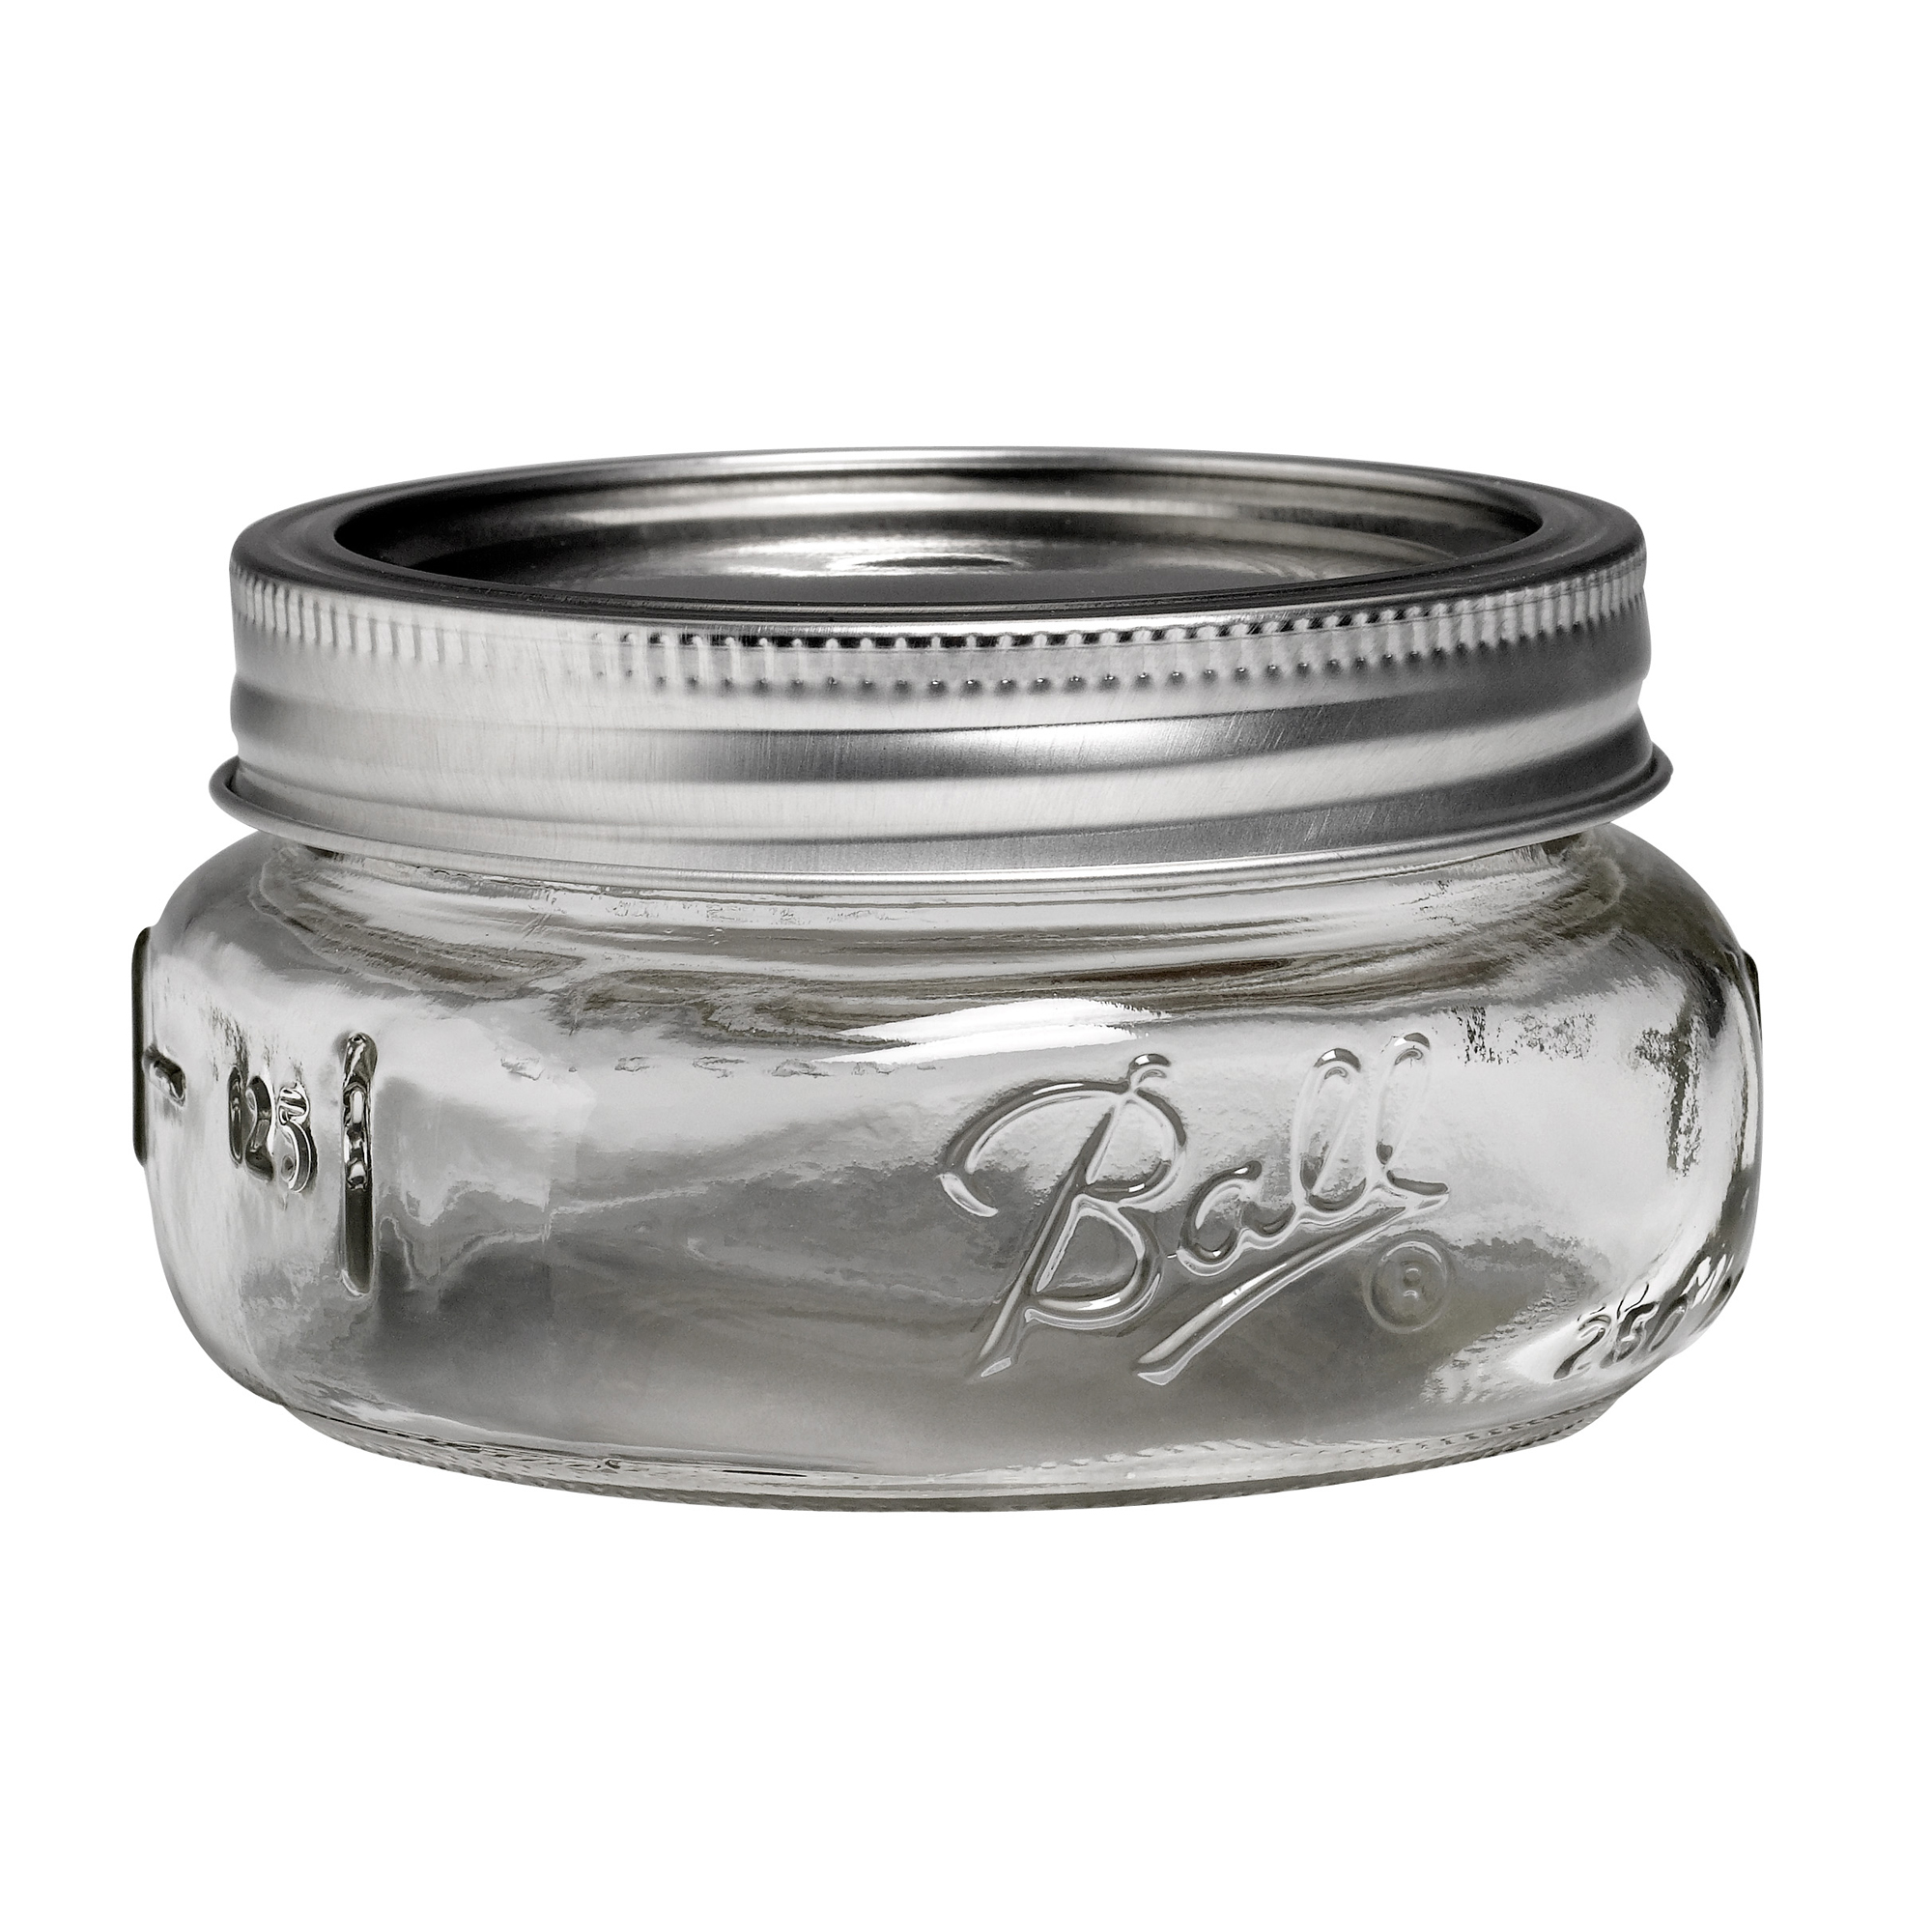 Ball Collection Elite Glass Mason Jar with Lid and Band, Wide Mouth, 8 Ounces, 4 Count - image 1 of 3